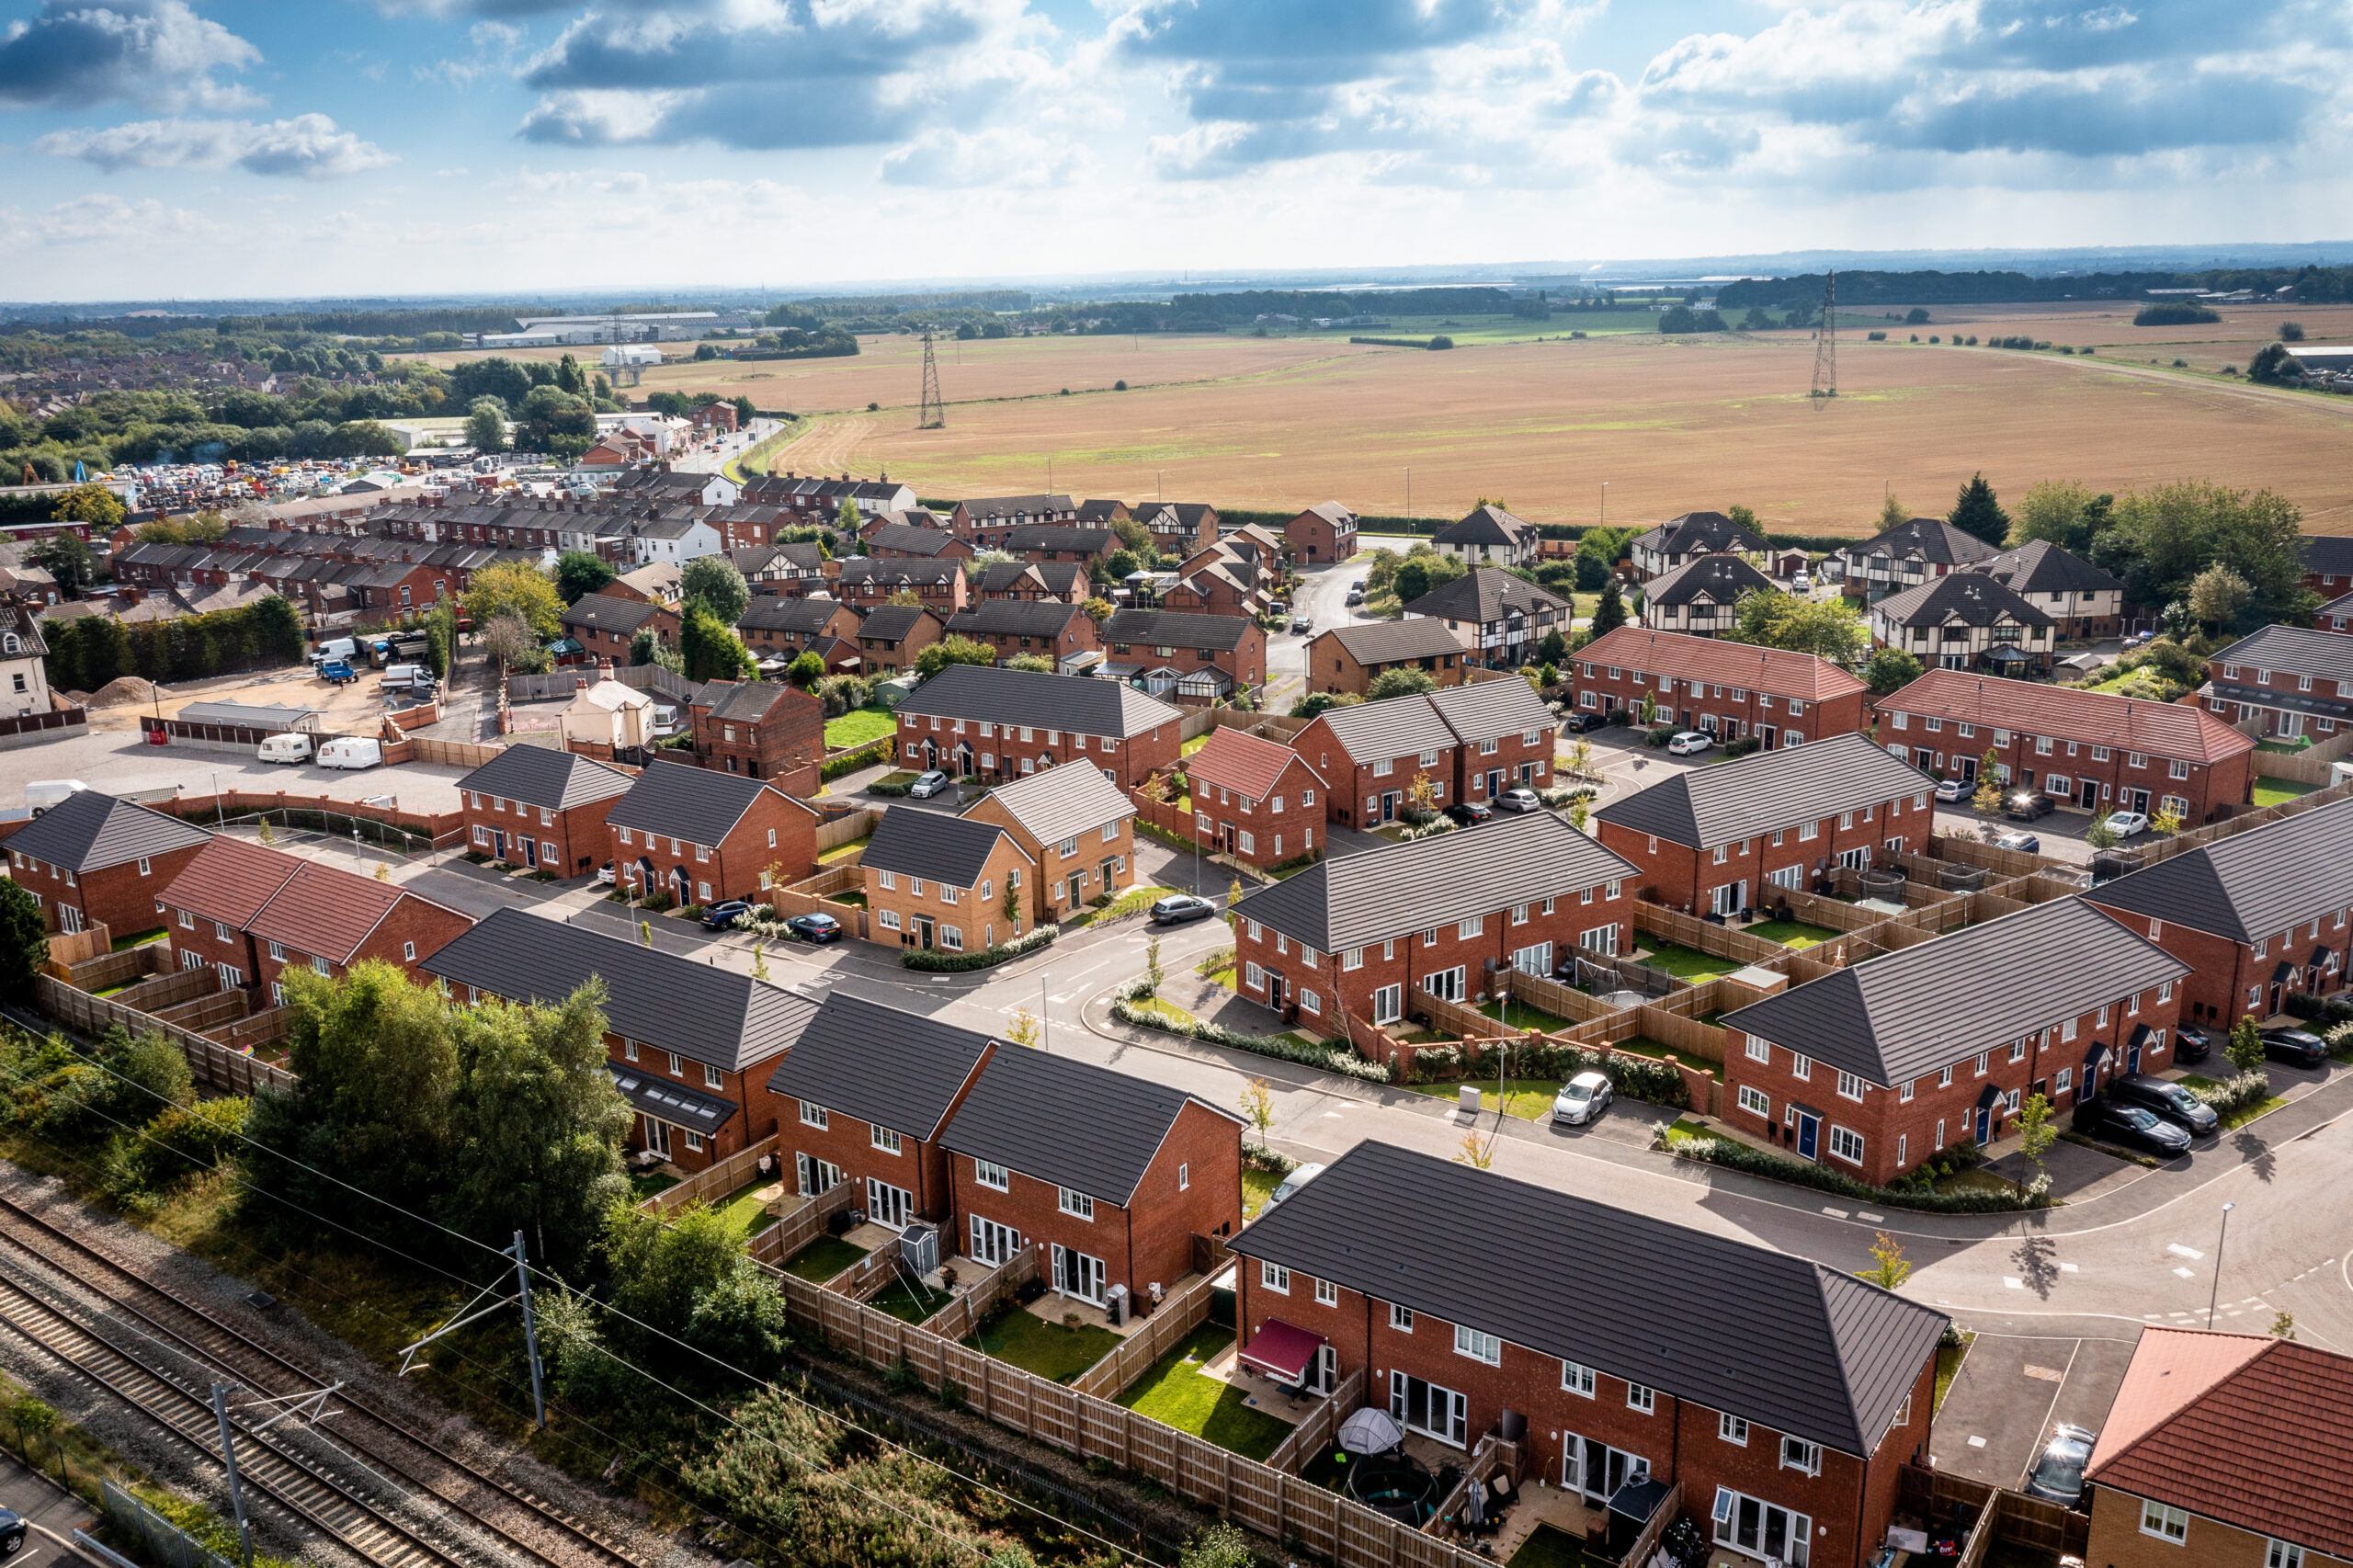 New Homes, Abbotsfield, Aerial Shot, St Helens